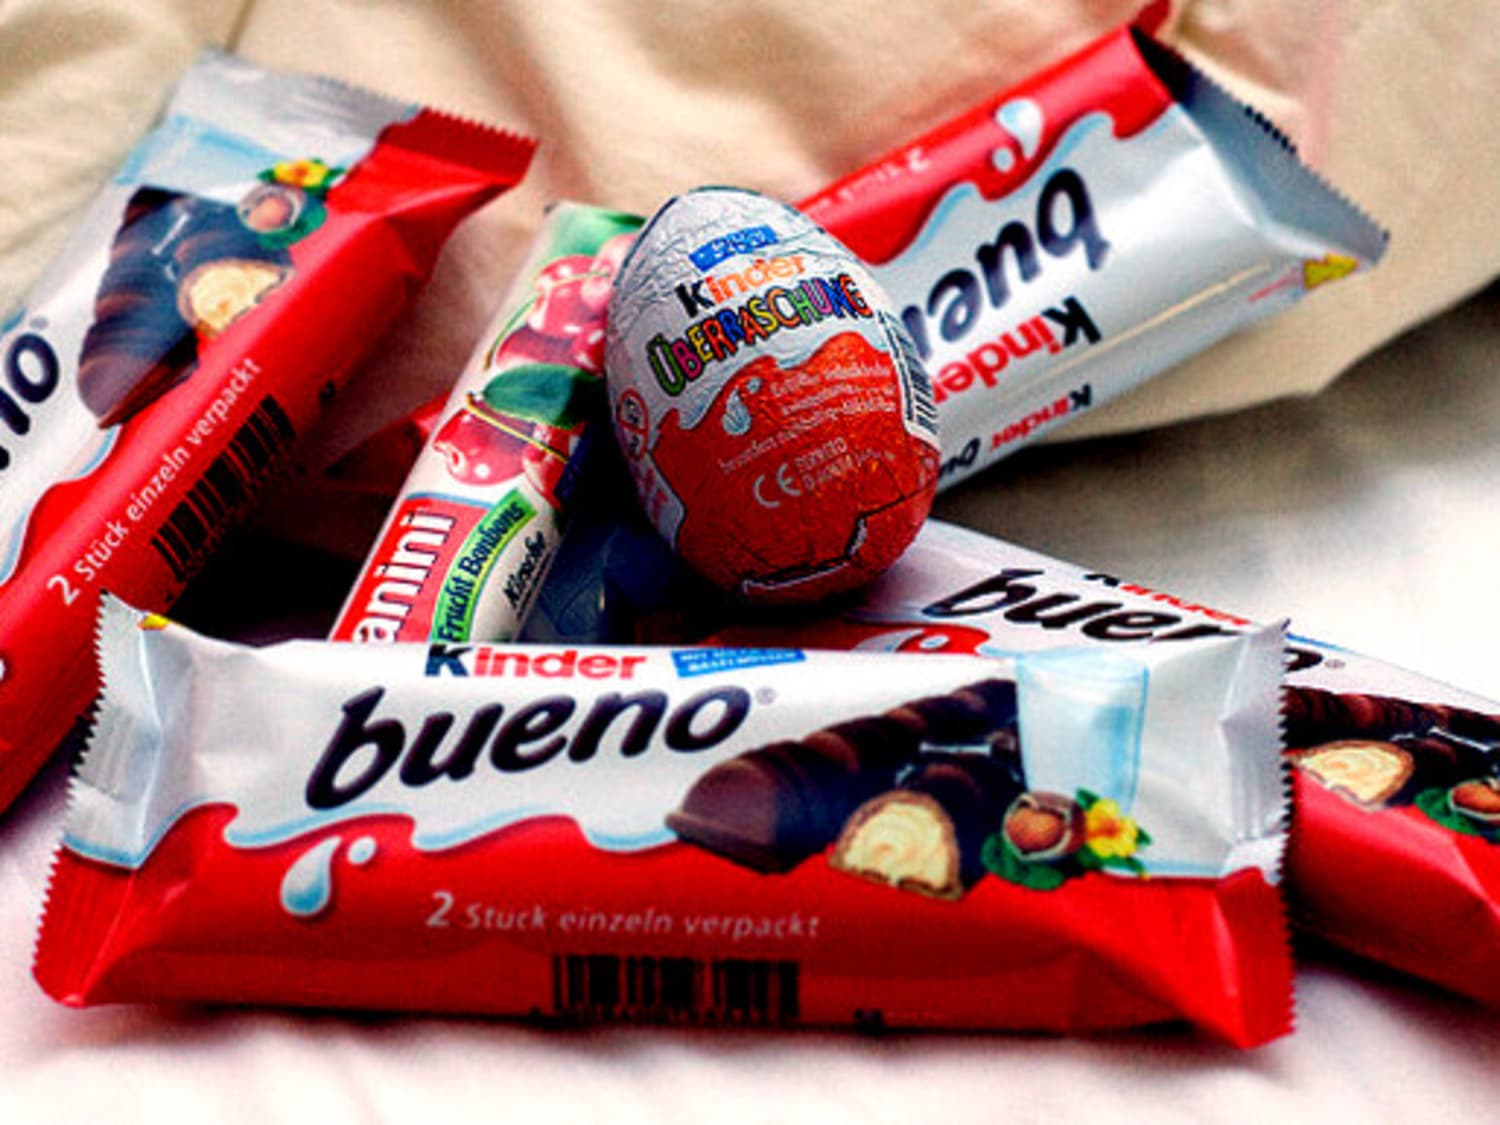 Kinder Bueno® is Giving Away Free Gas and Chocolate Bars to Help